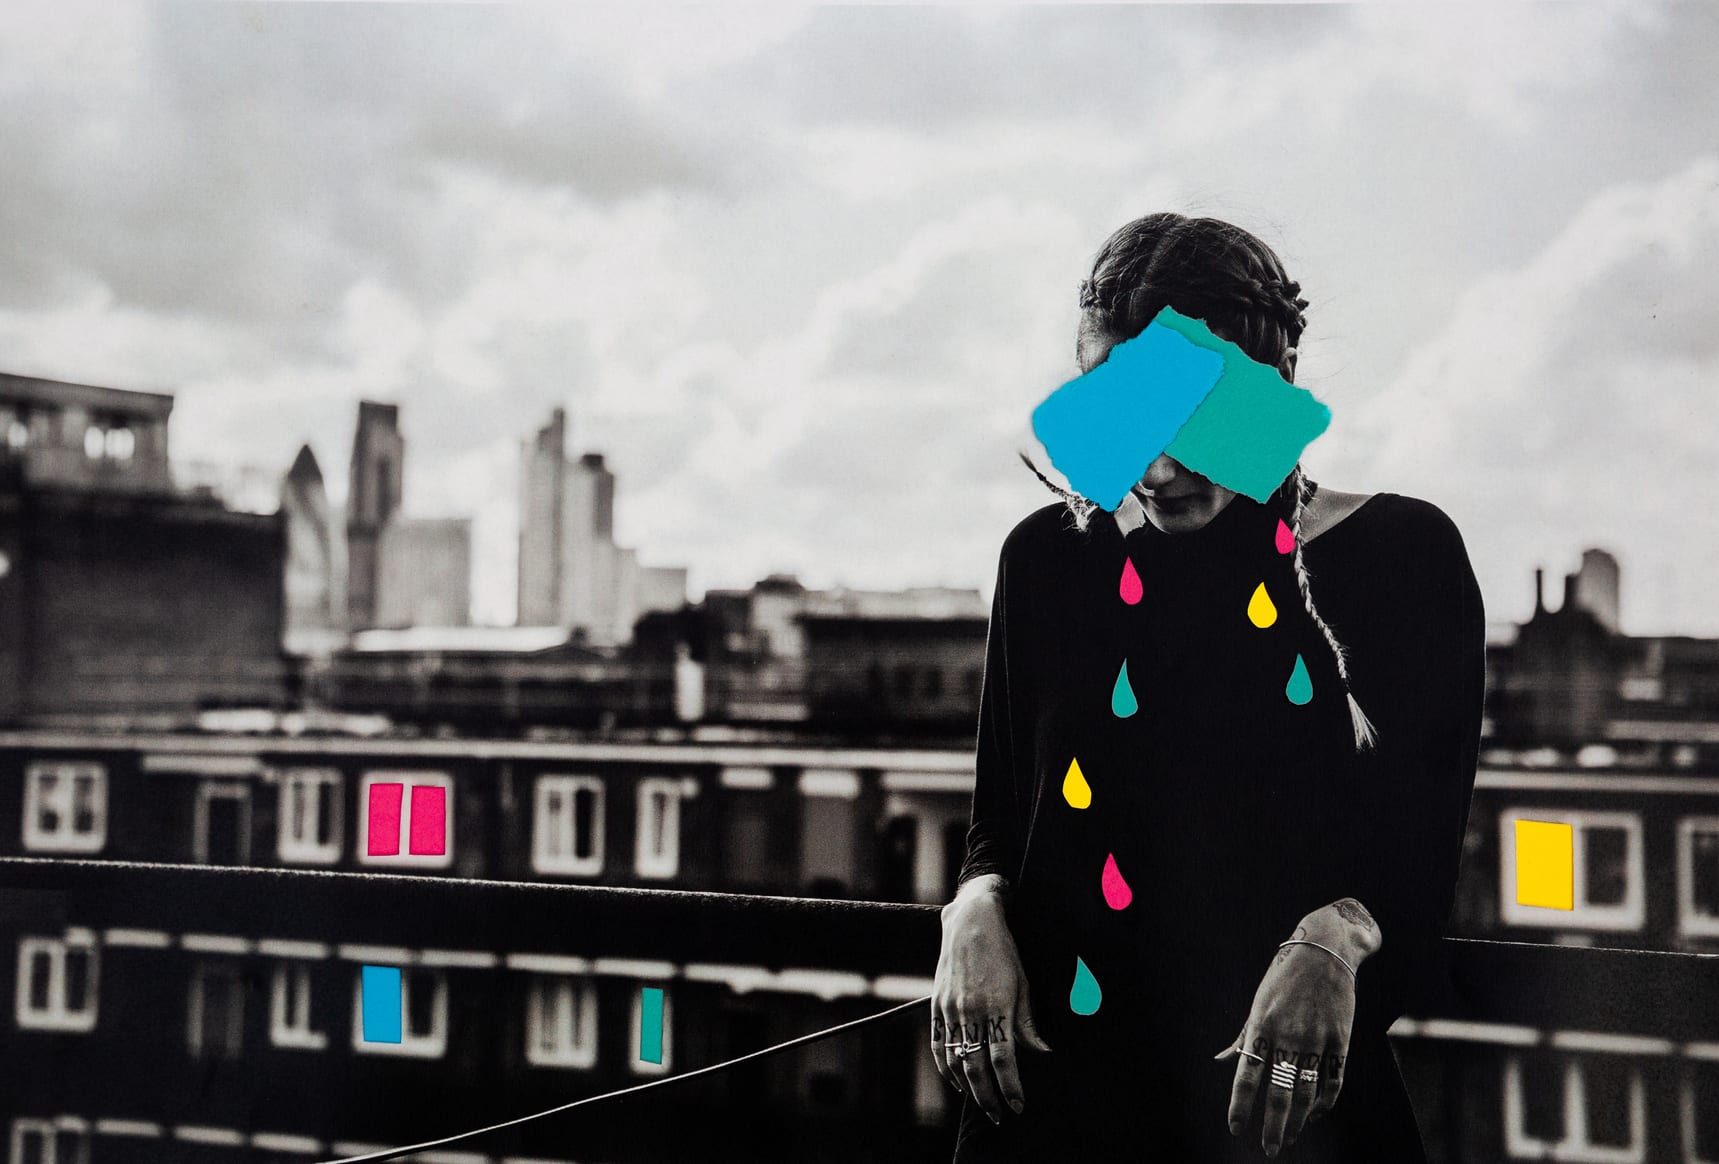 Mixed media analogue collage portrait of an anonymous woman on a rooftop with color blocked tears in blue, teal, pink and yellow, behind her the windows of flats are also color blocked.